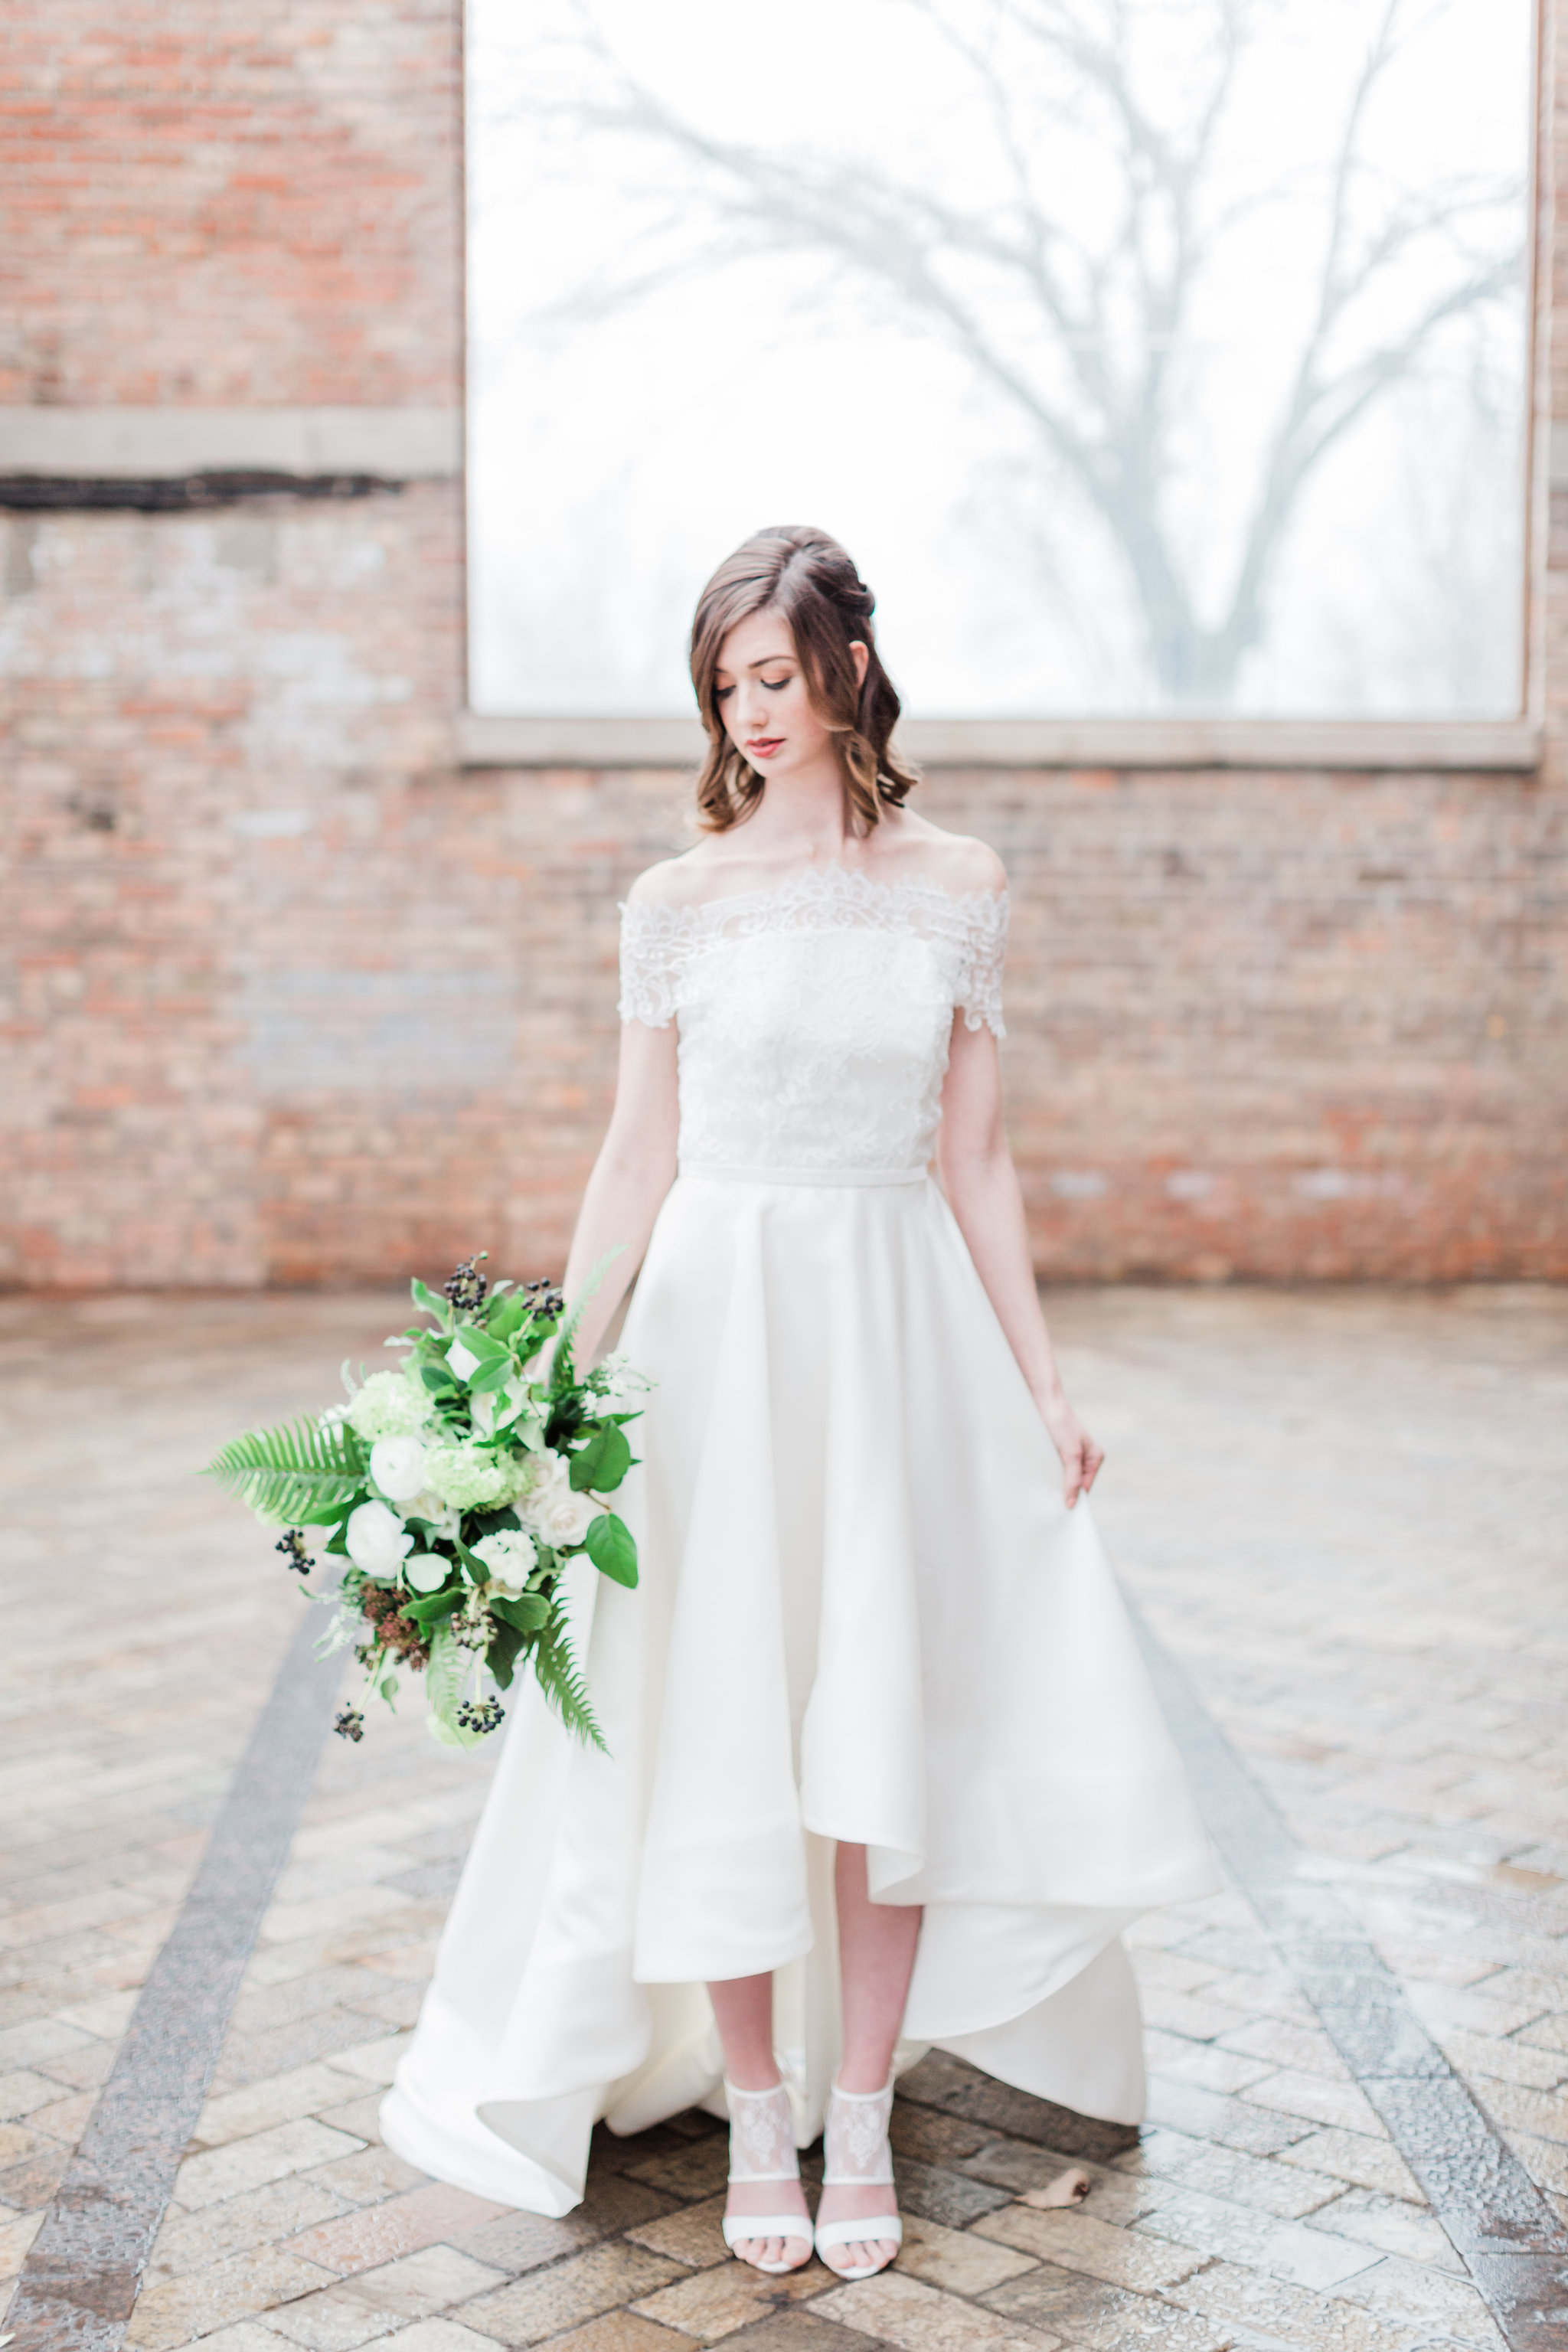 Bride holding white and green winter wedding bouquet.